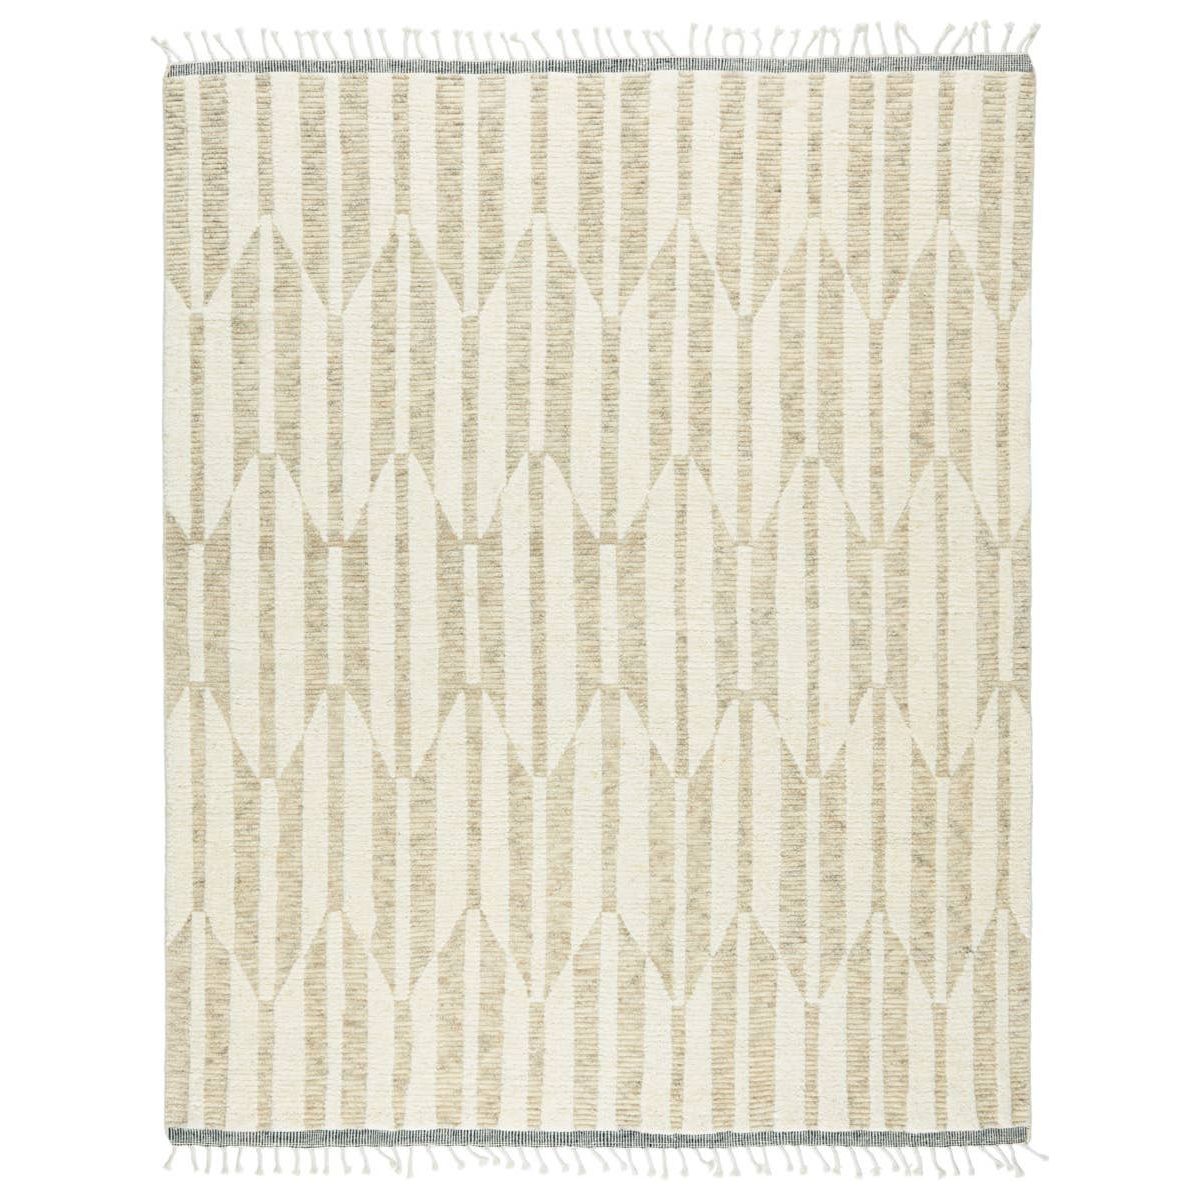 The Keoka Quest Area Rug by Jaipur Living, or KEO01 features tones of beige, light gray, and ivory. The light and airy colorway of the Quest rug anchors room with versatility and neutral appeal. The texture-rich wool pile features a ribbed construction that lends unique linear details to the dynamic geometric patterns.